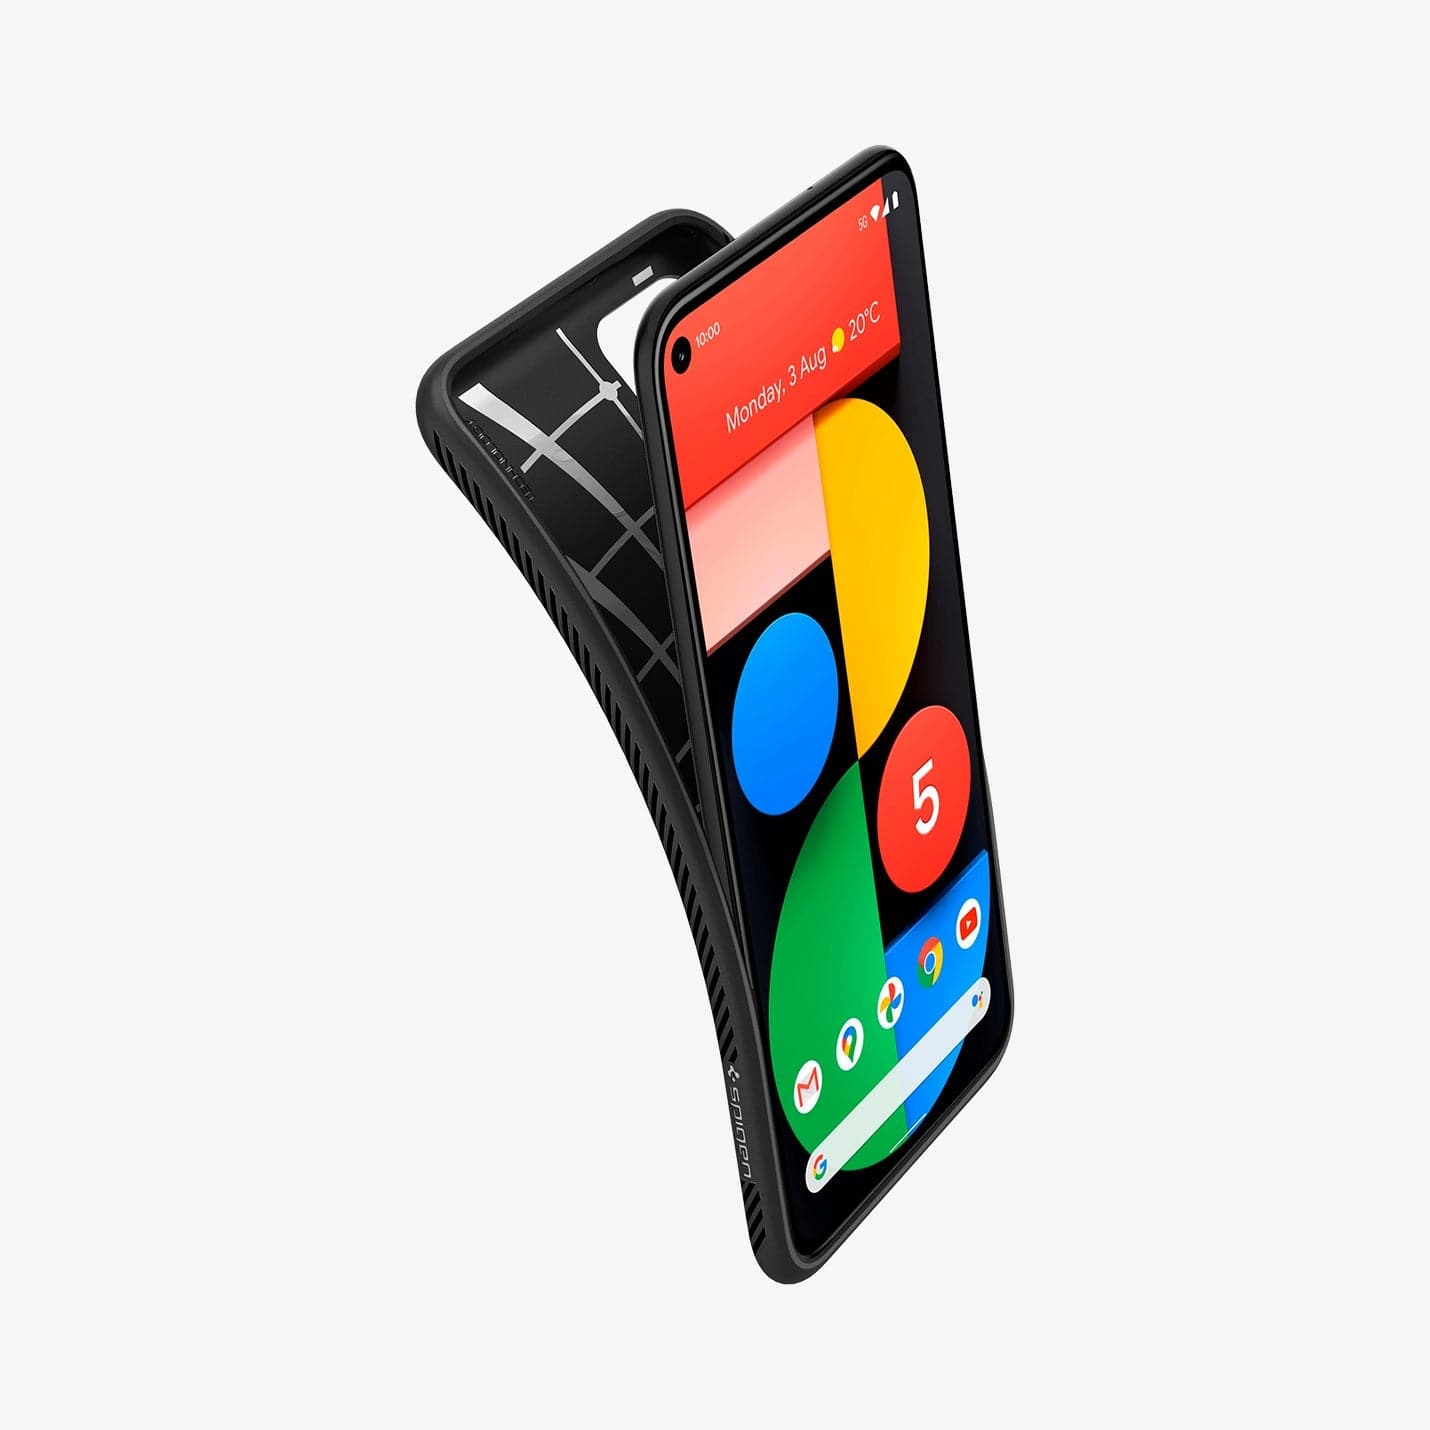 ACS01896 - Pixel 5 Case Liquid Air in black showing the case bending away from device to show the flexibility